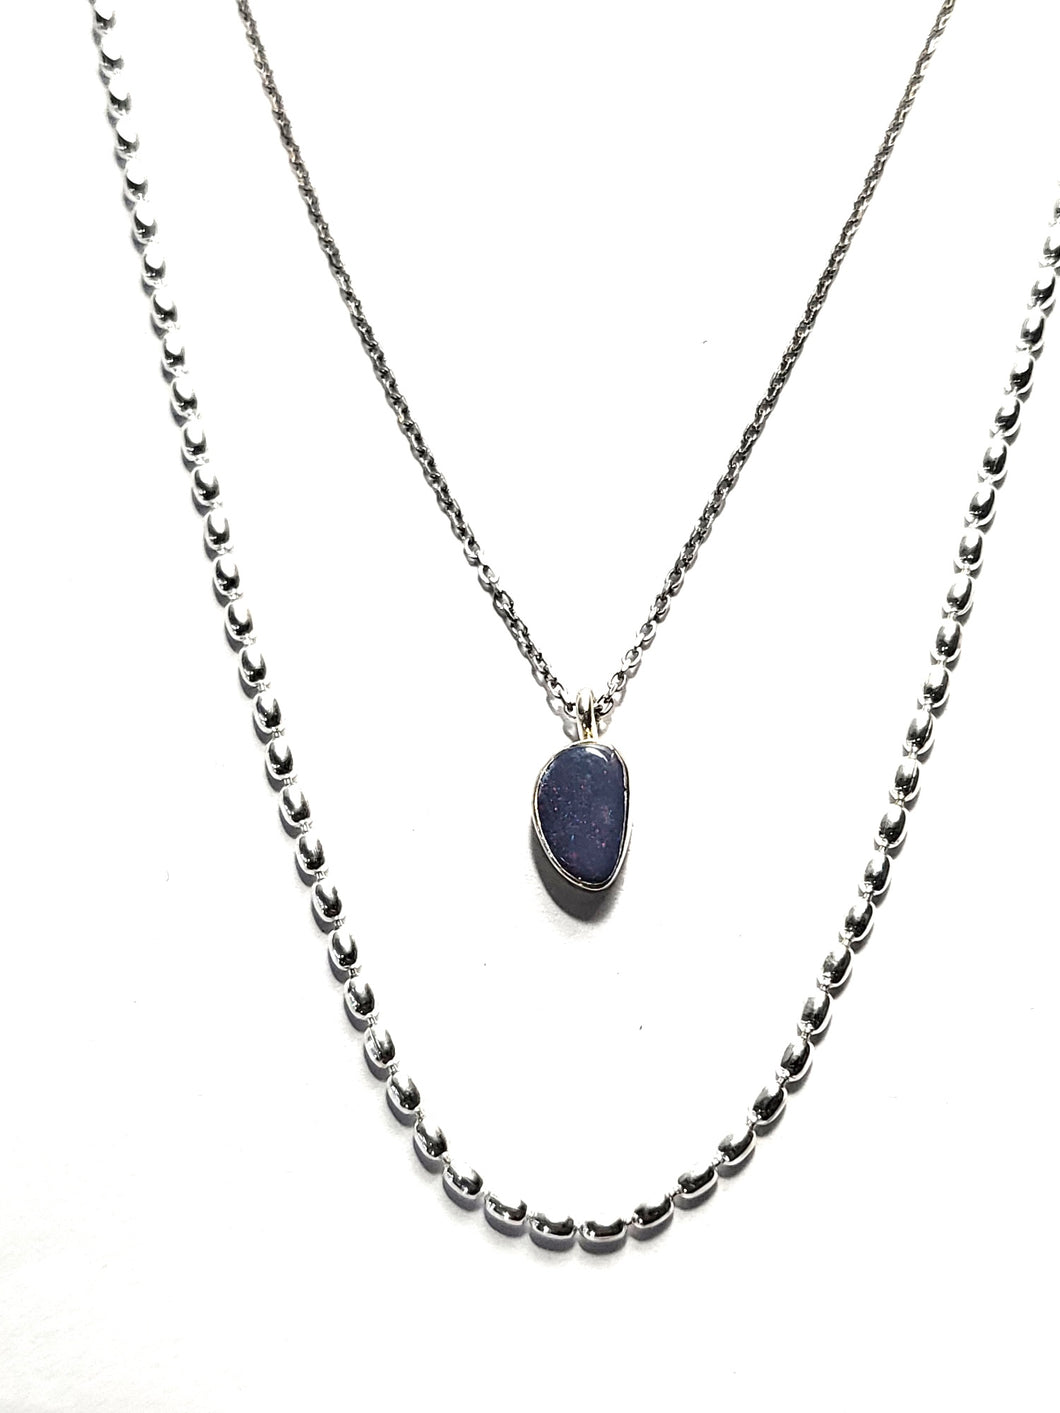 NEW A/T Opal Necklace